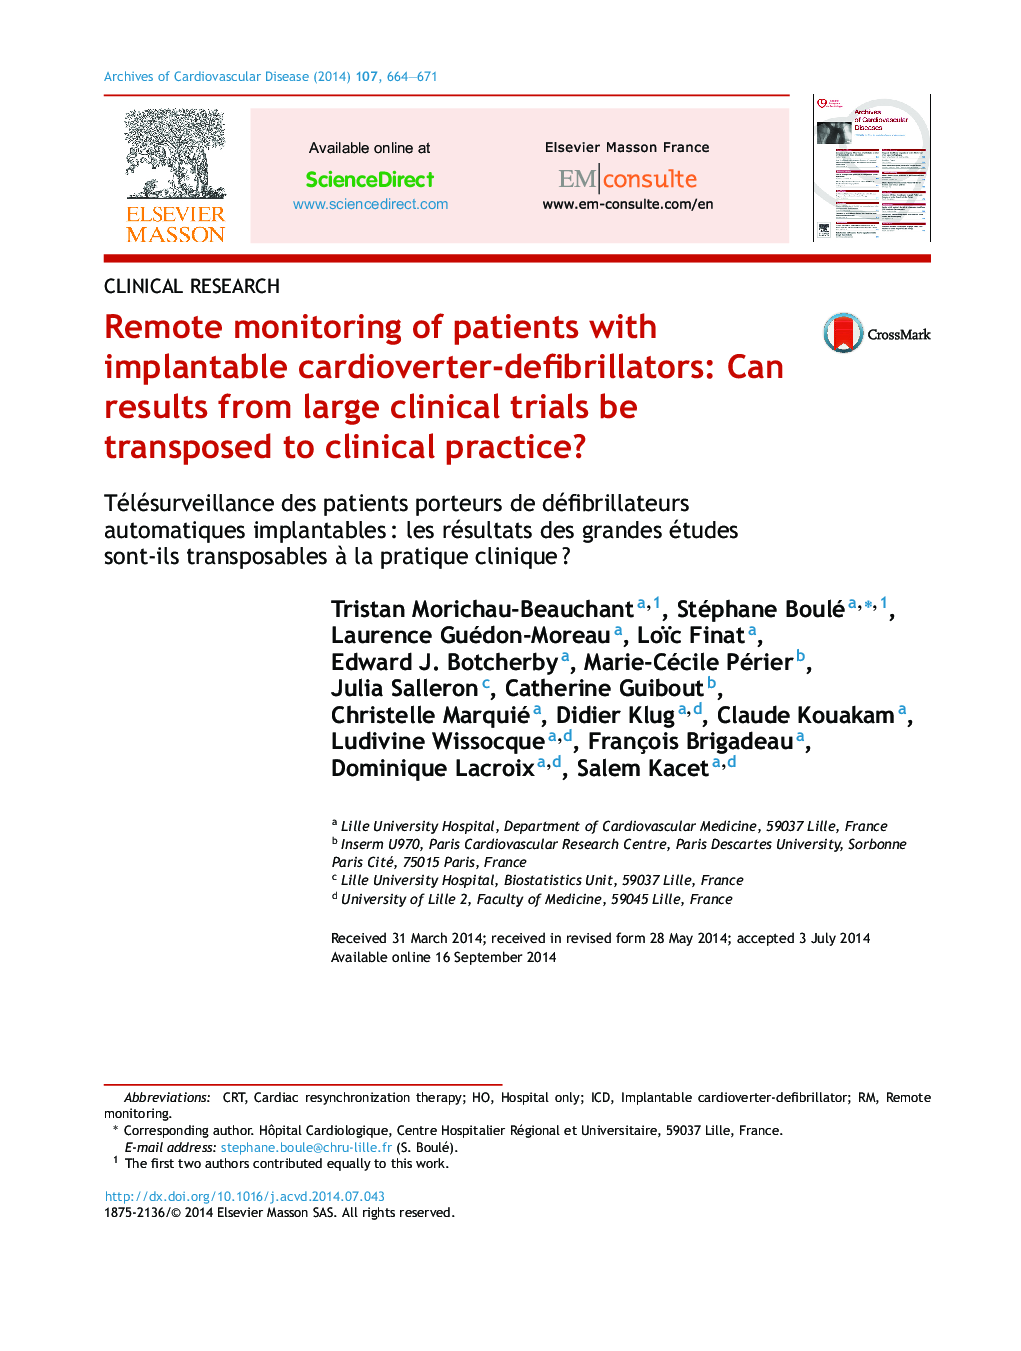 Remote monitoring of patients with implantable cardioverter-defibrillators: Can results from large clinical trials be transposed to clinical practice?